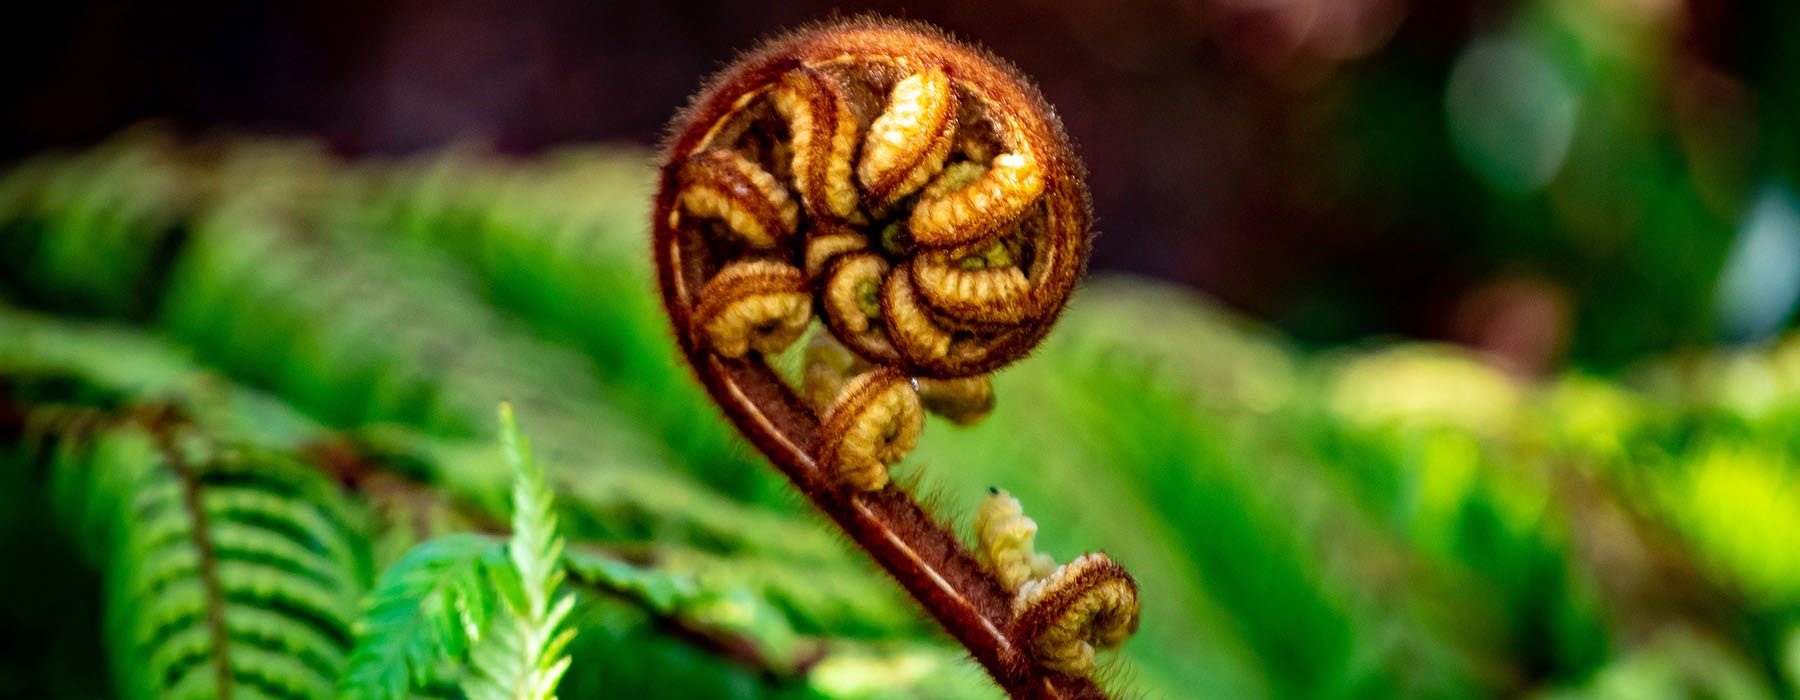 Close up of a the tight curled shoots of a fern